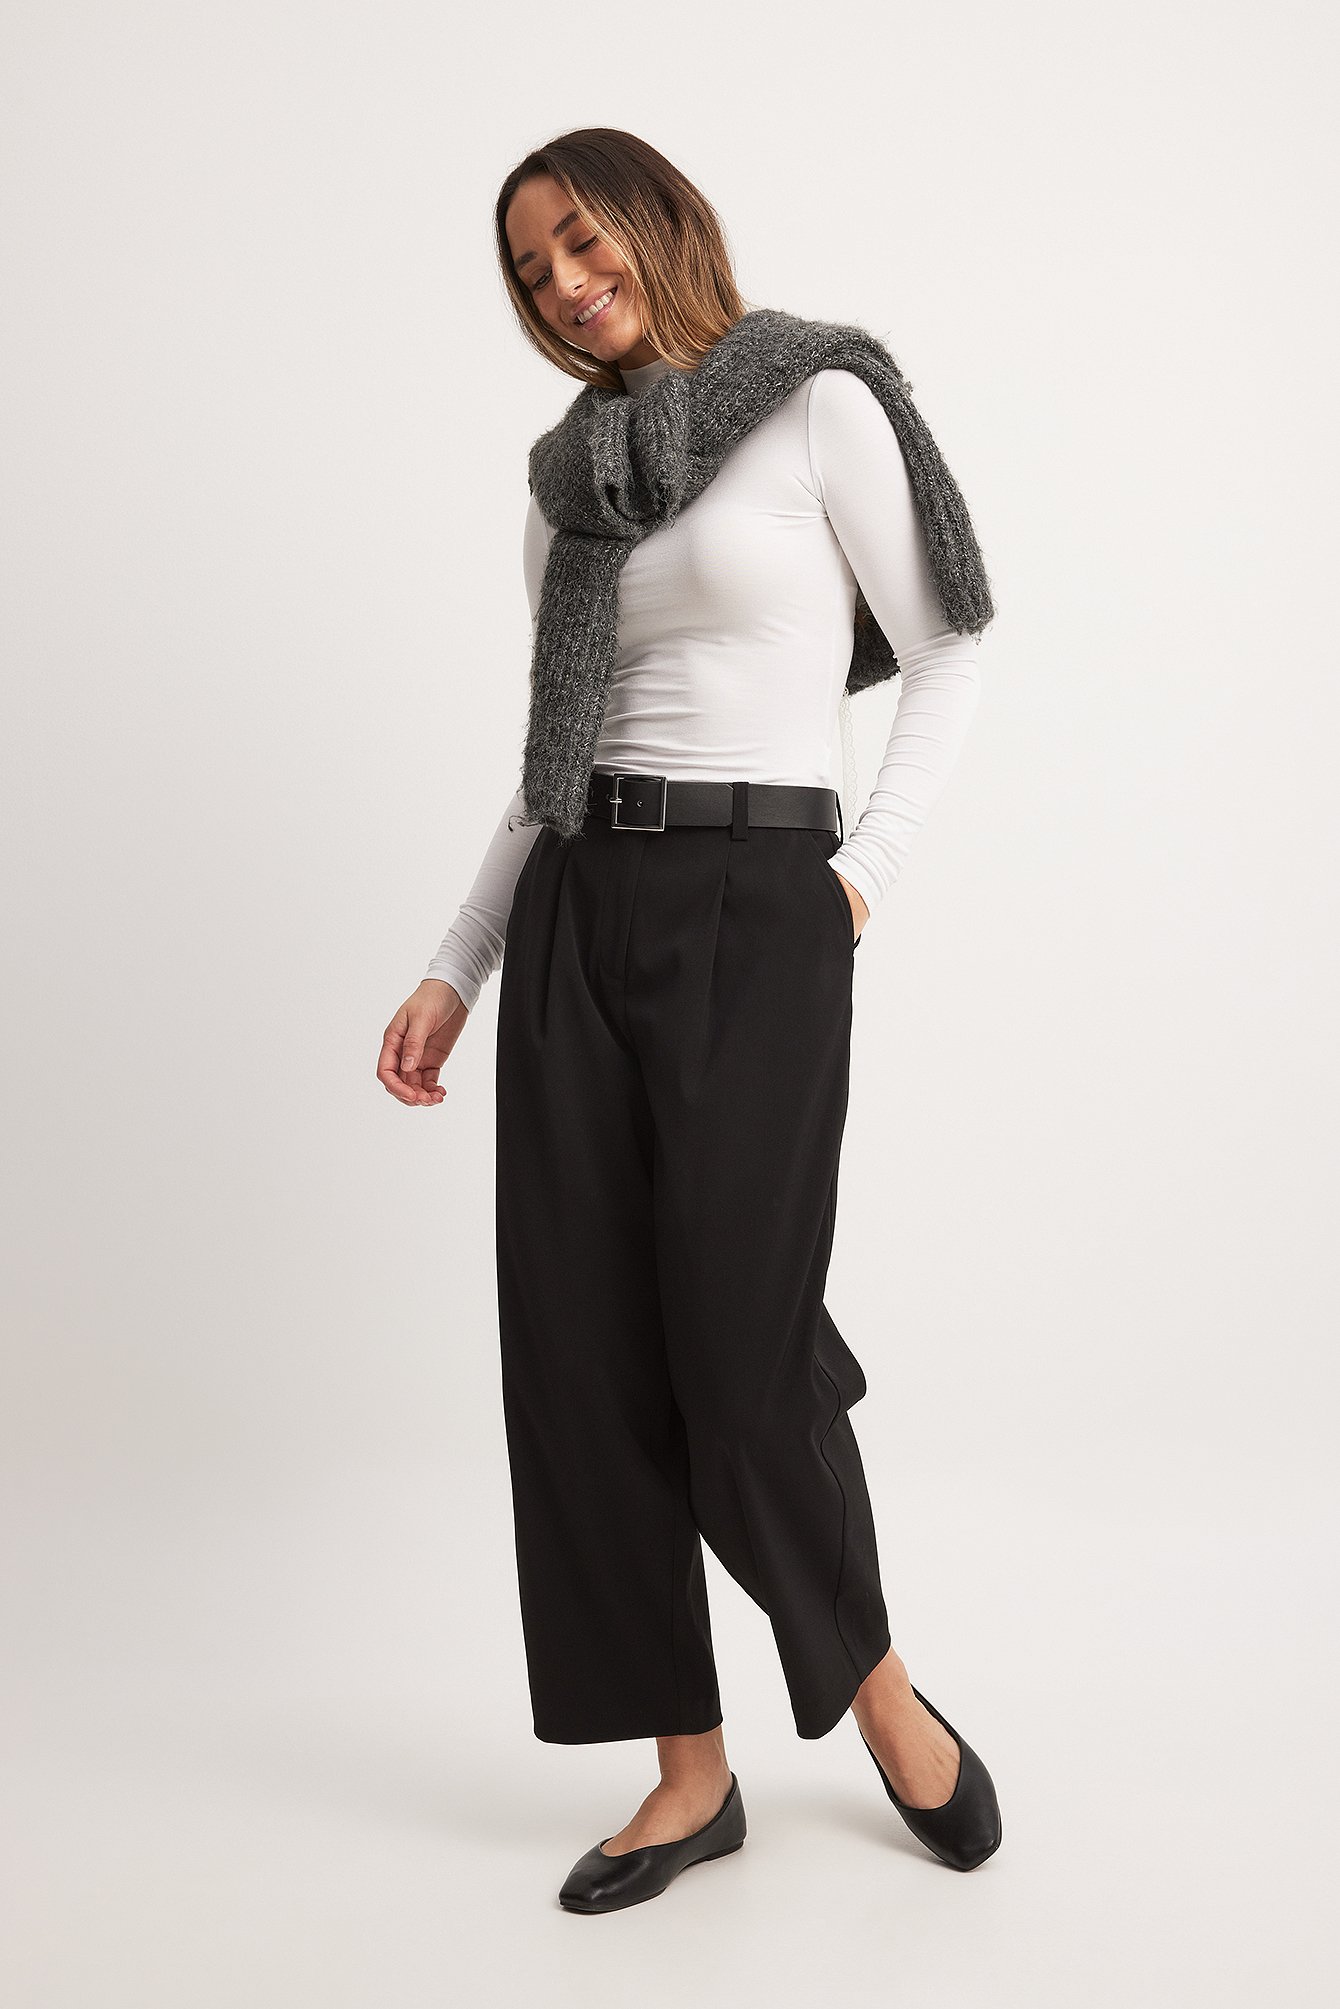 Black Trousers - Tapered Trousers - Office Chic Trousers - Lulus